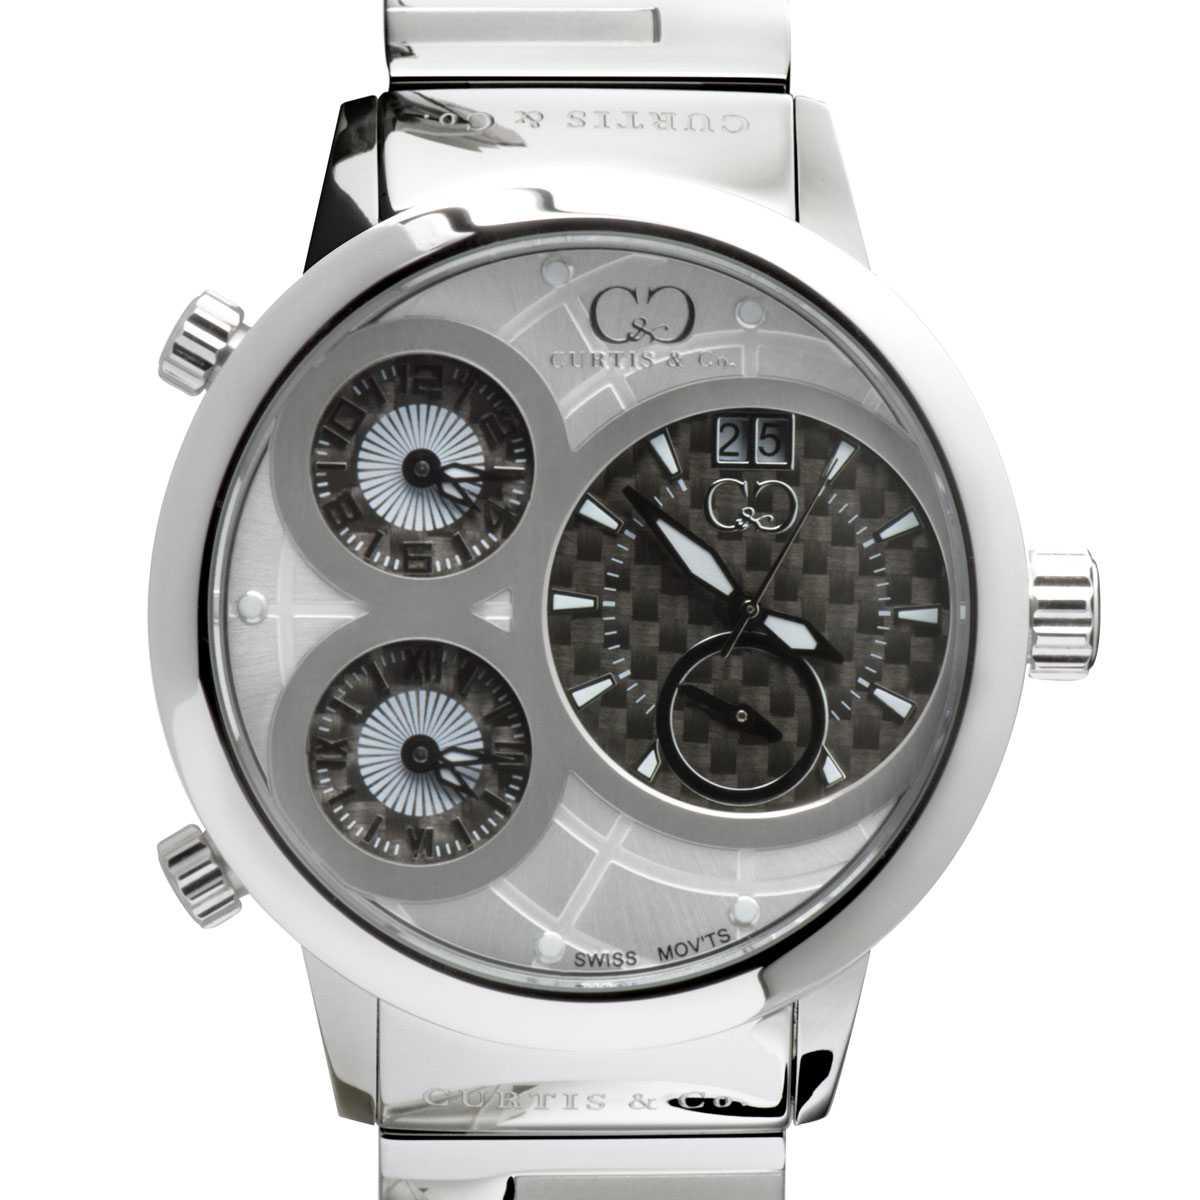 Curtis & Co Big Time World 57mm 4 Time Zone White Dial Stainless Steel Watch - Flyclothing LLC